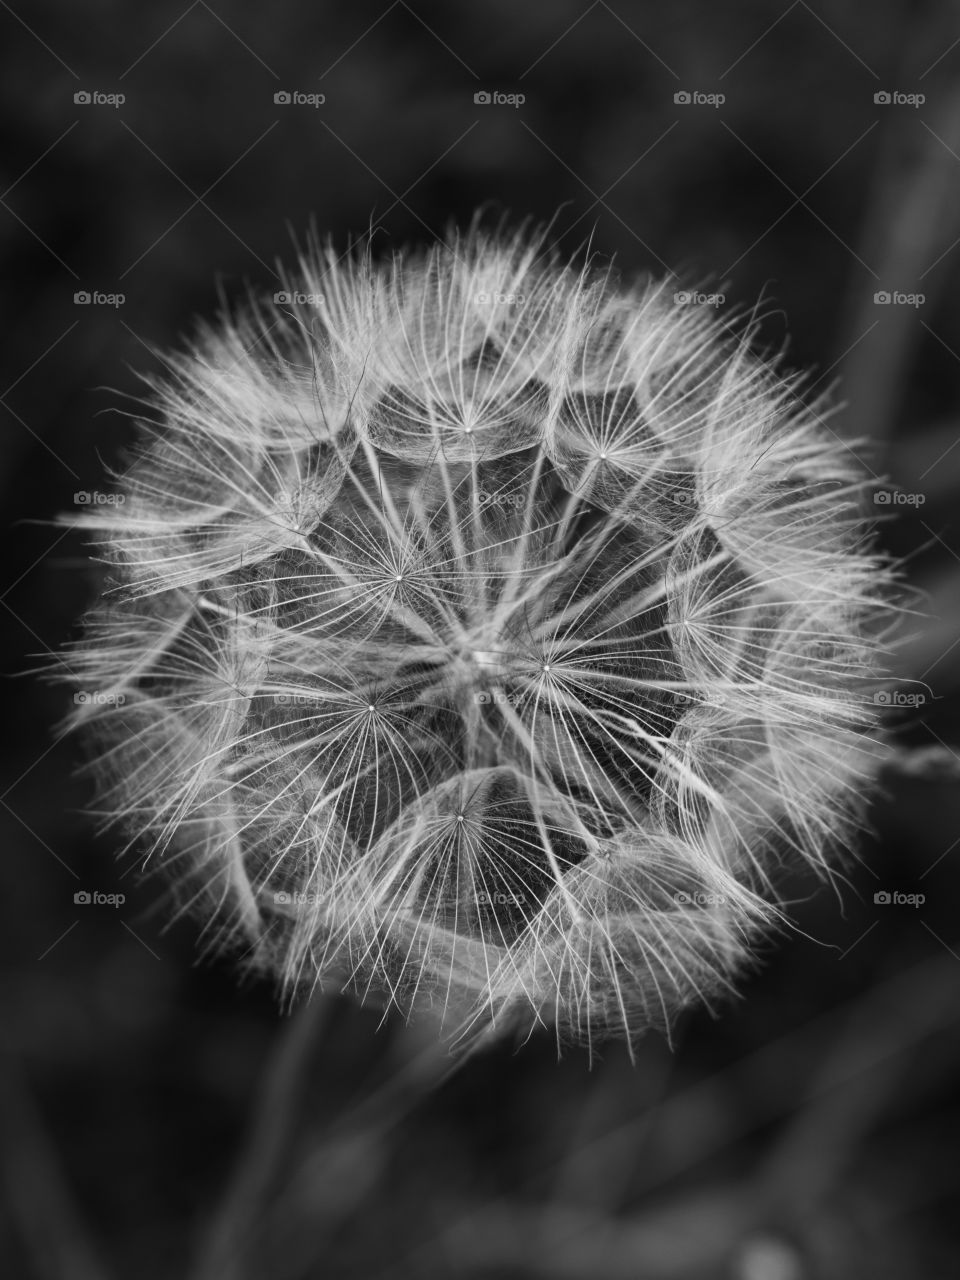 Black and white dandelion seed heads